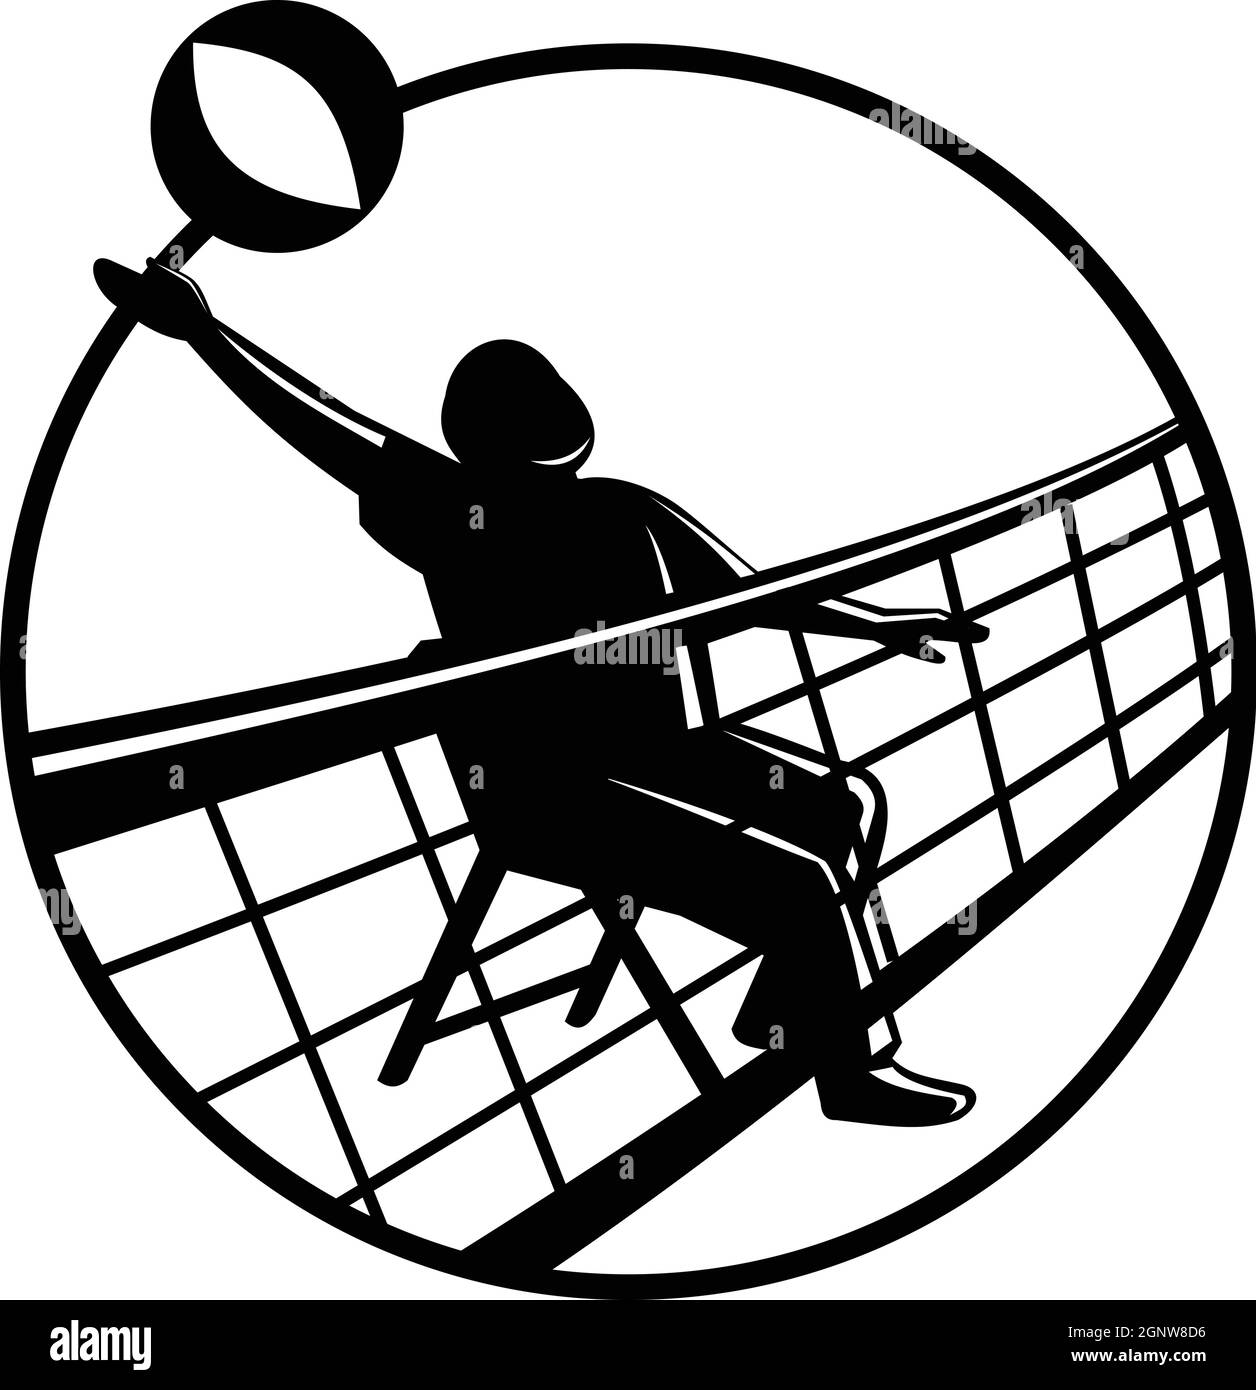 Mascot illustration of senior chair volleyball player spiking the ball over net on isolated white background inside circle in retro black and white st Stock Vector